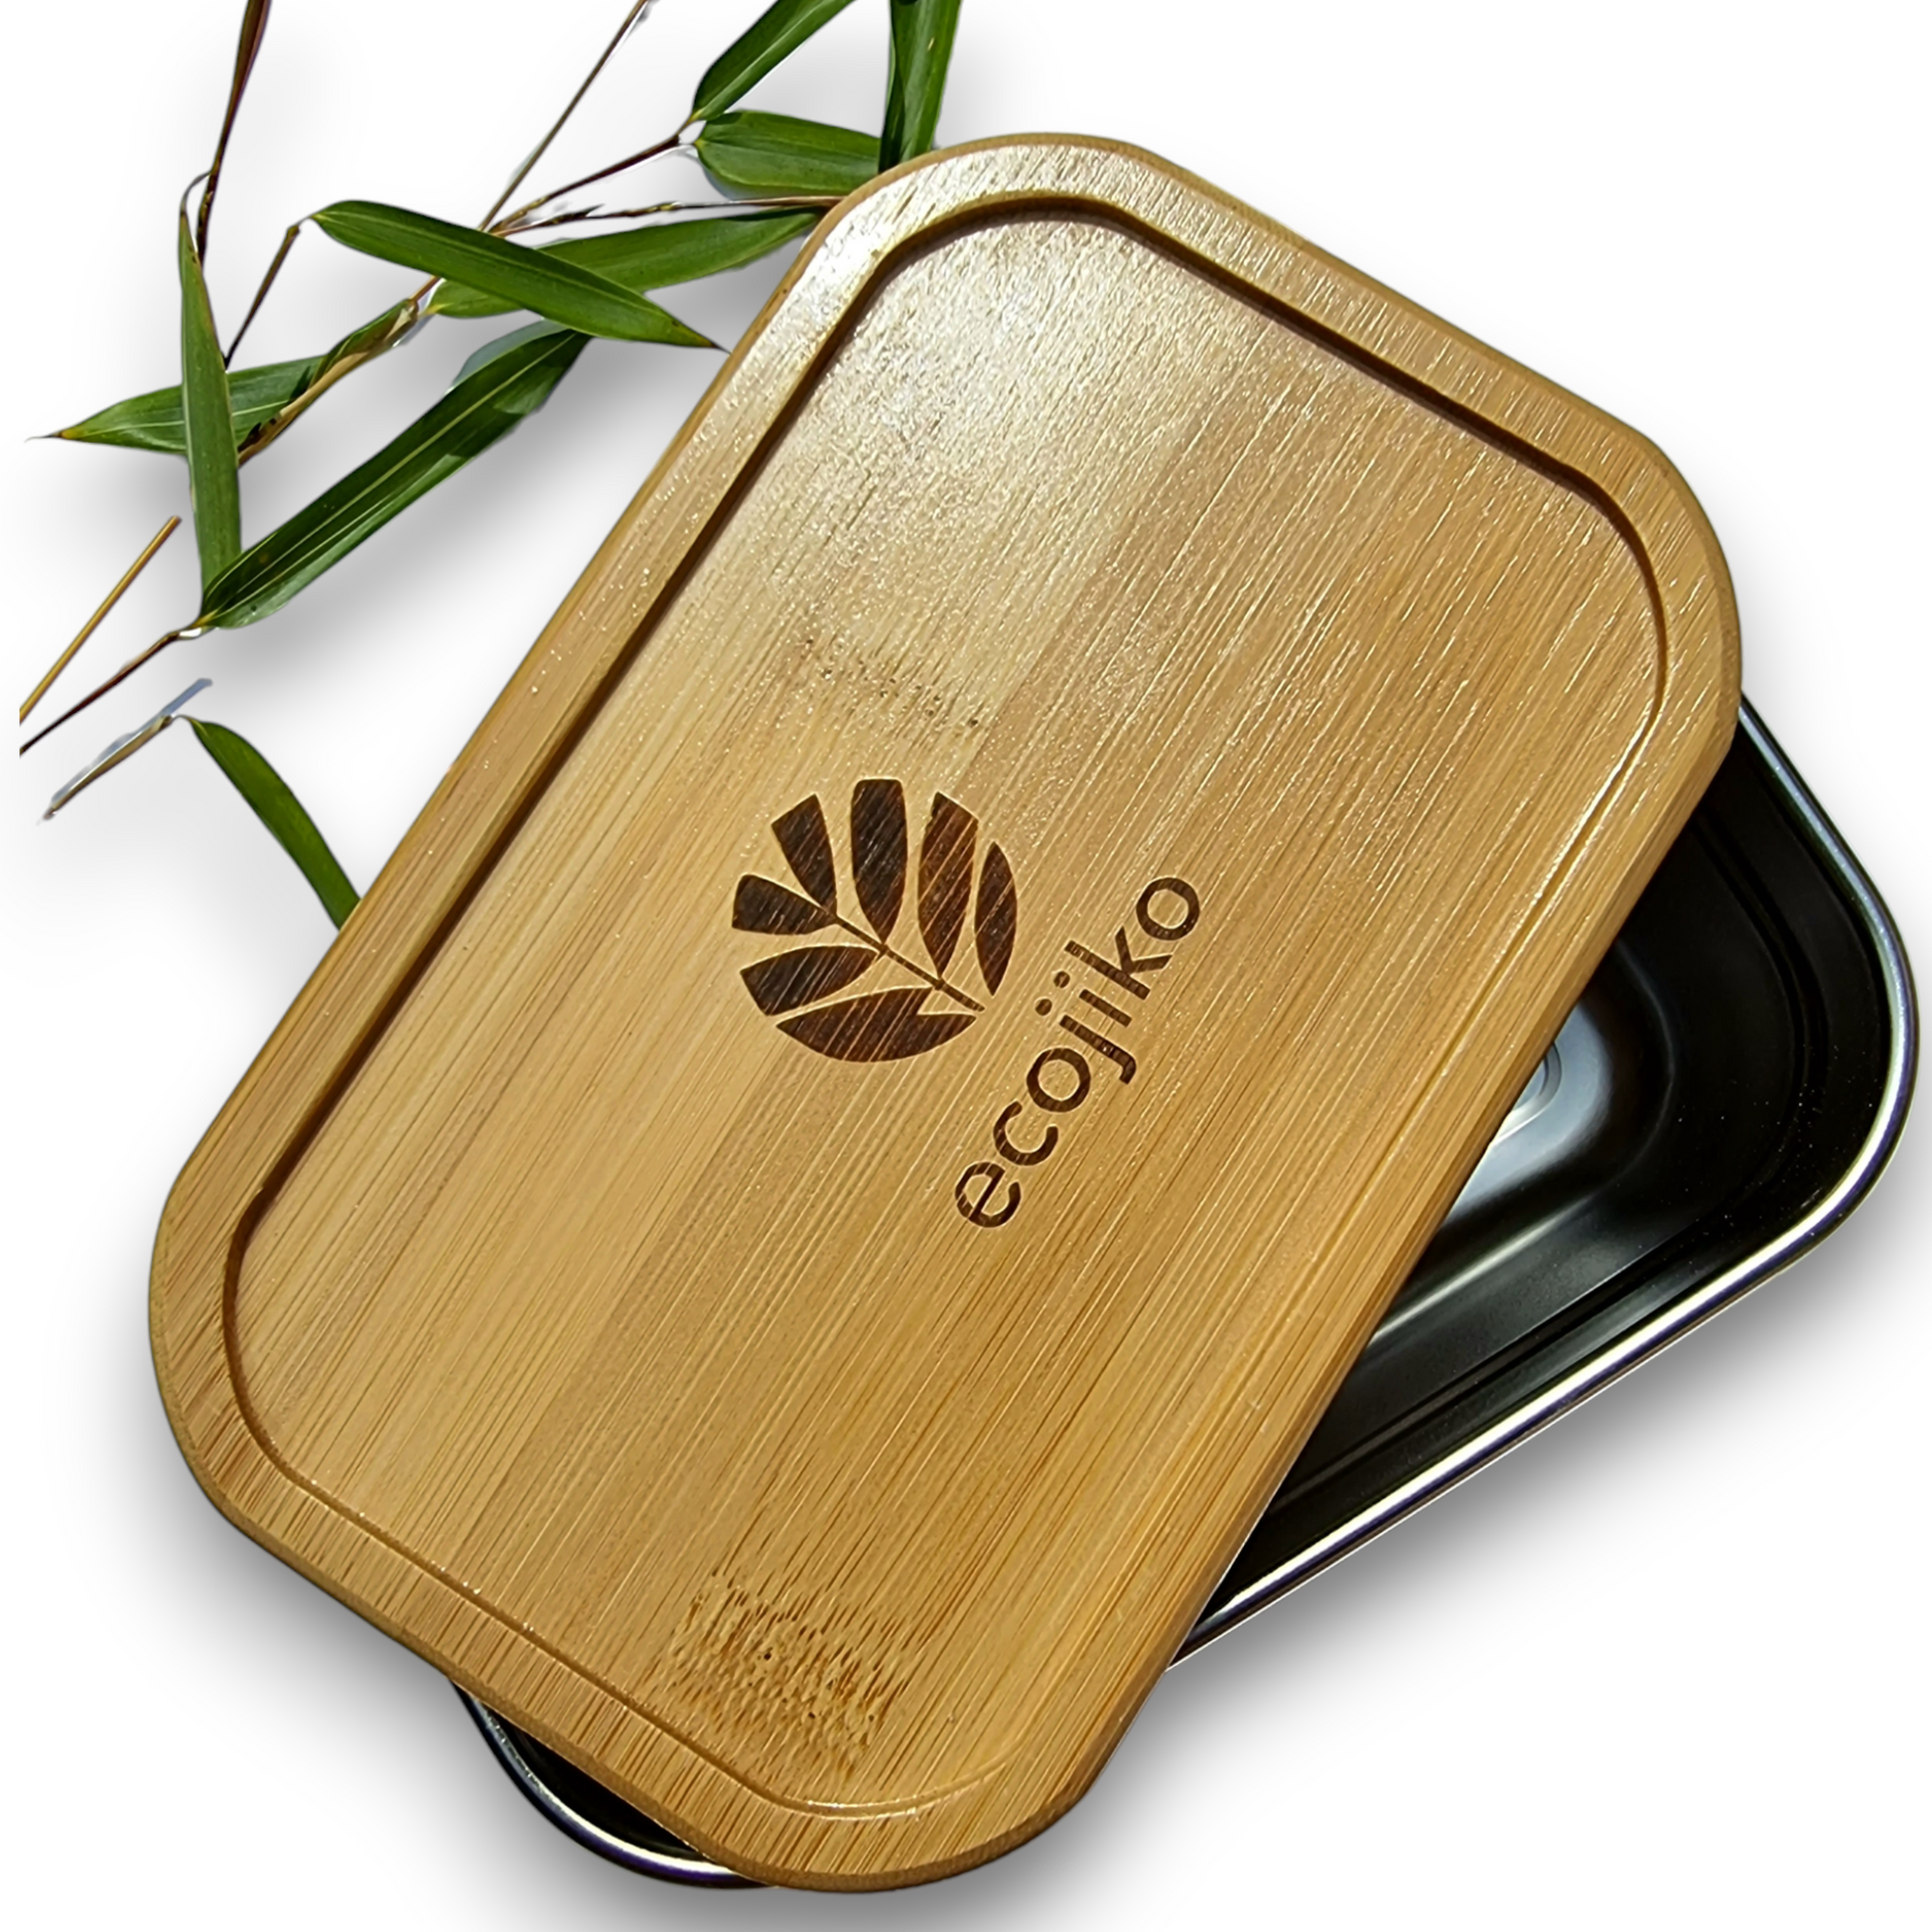 ecojiko stainless steel and bamboo reusable lunch box